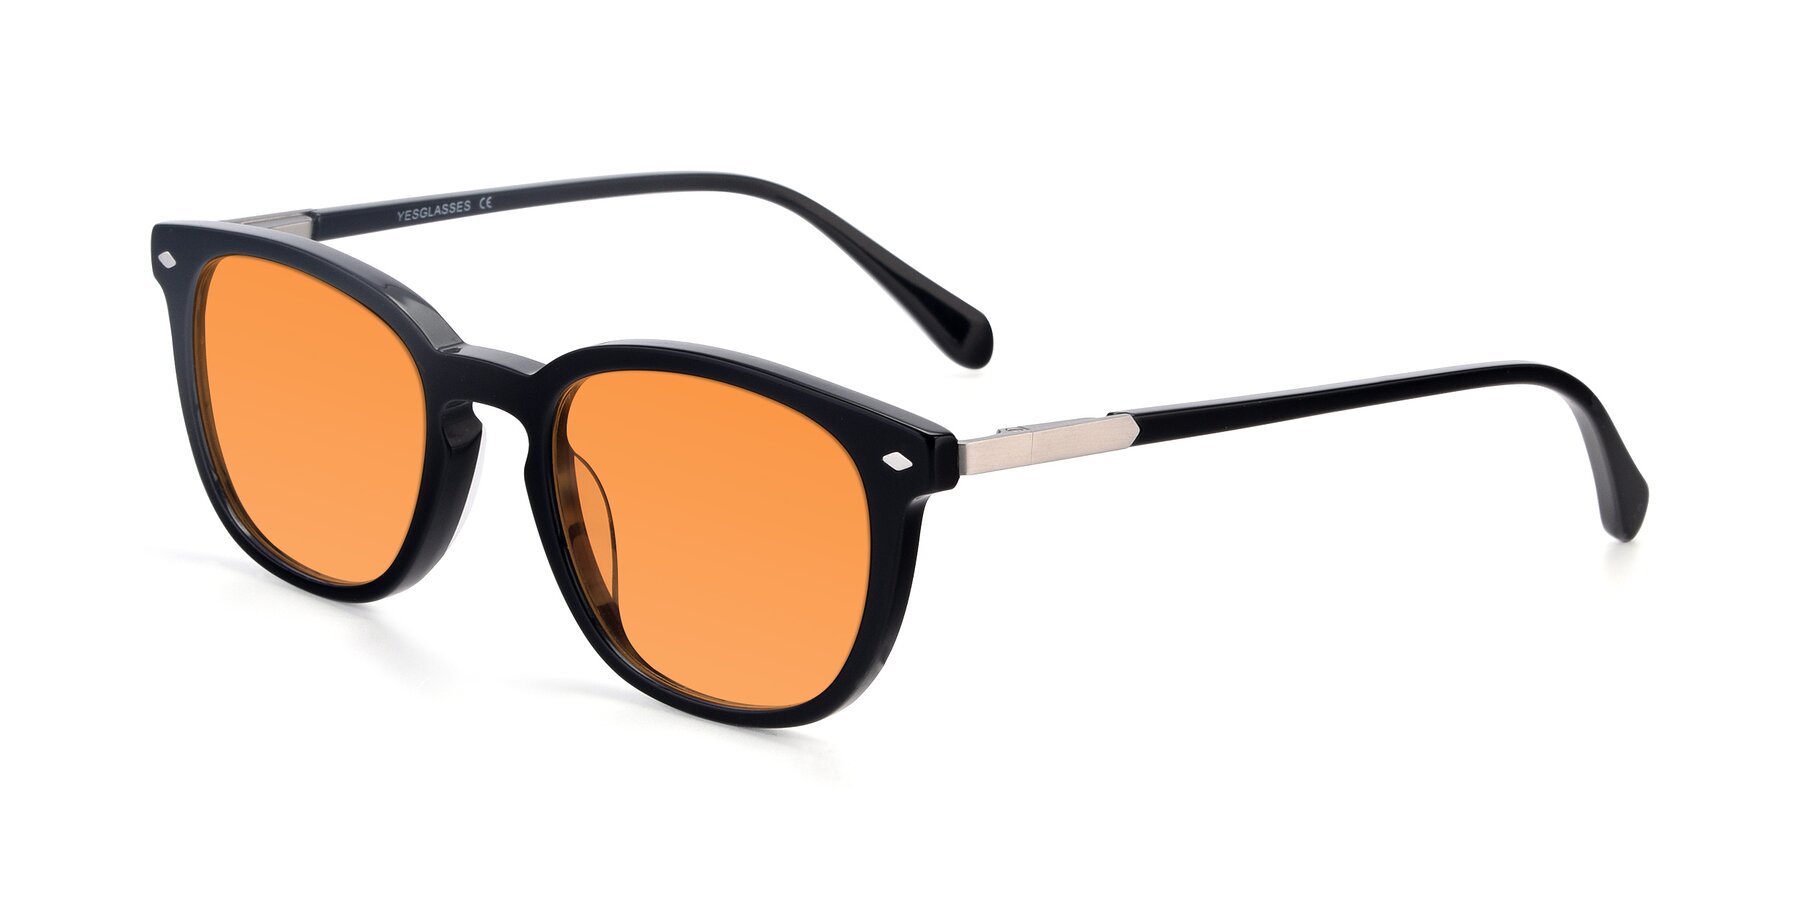 Angle of 17578 in Black with Orange Tinted Lenses